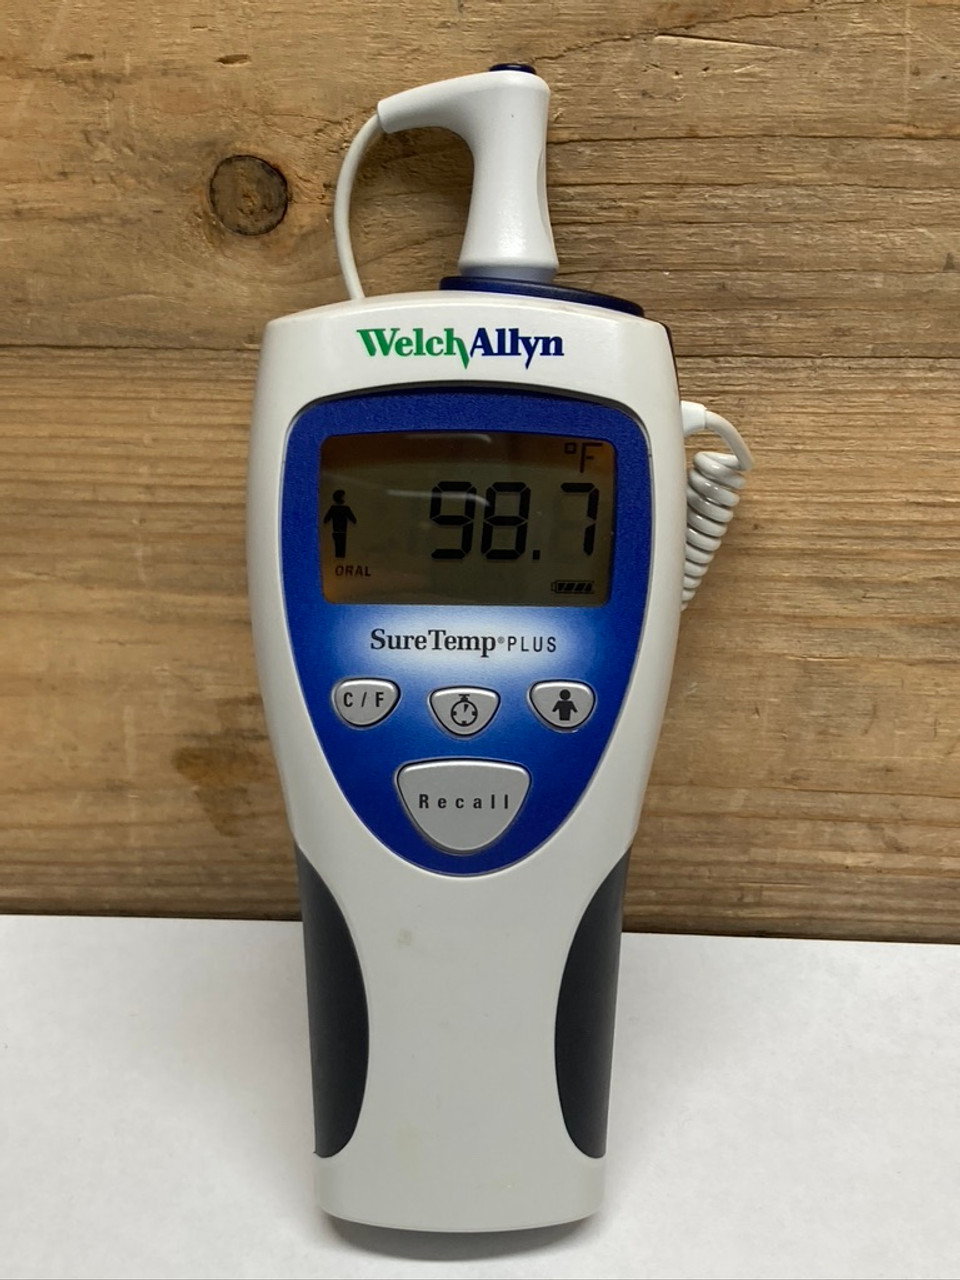 Welch Allyn SureTemp Plus Digital Thermometer FOR SALE